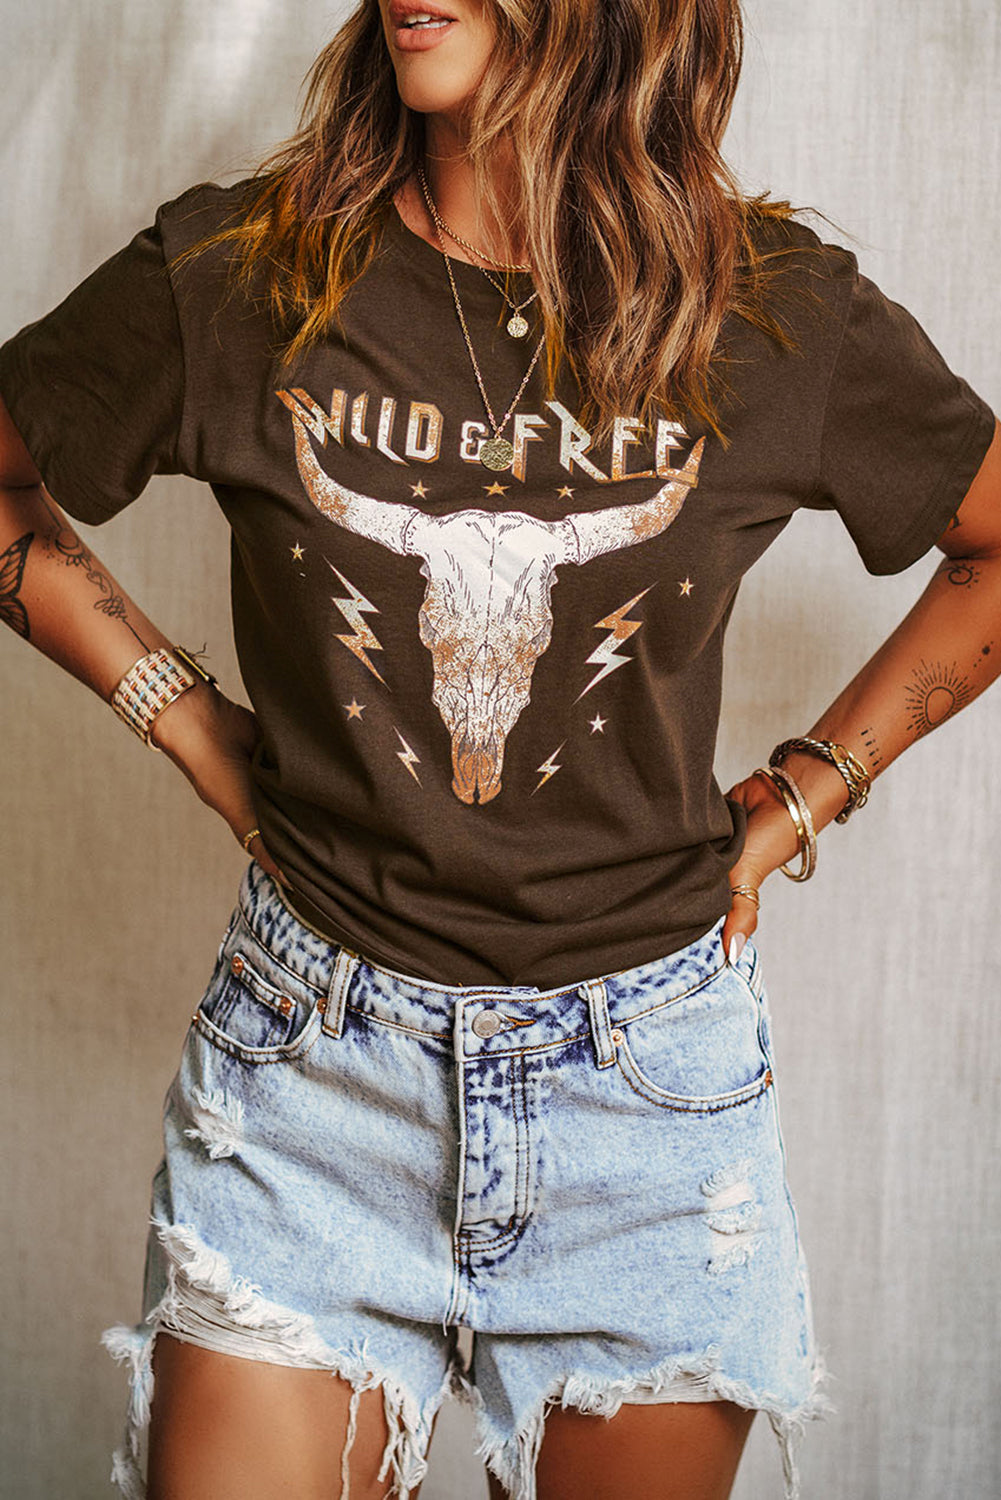 WILD FREE Animal Graphic Tee - PRIVATE LABEL STYLES